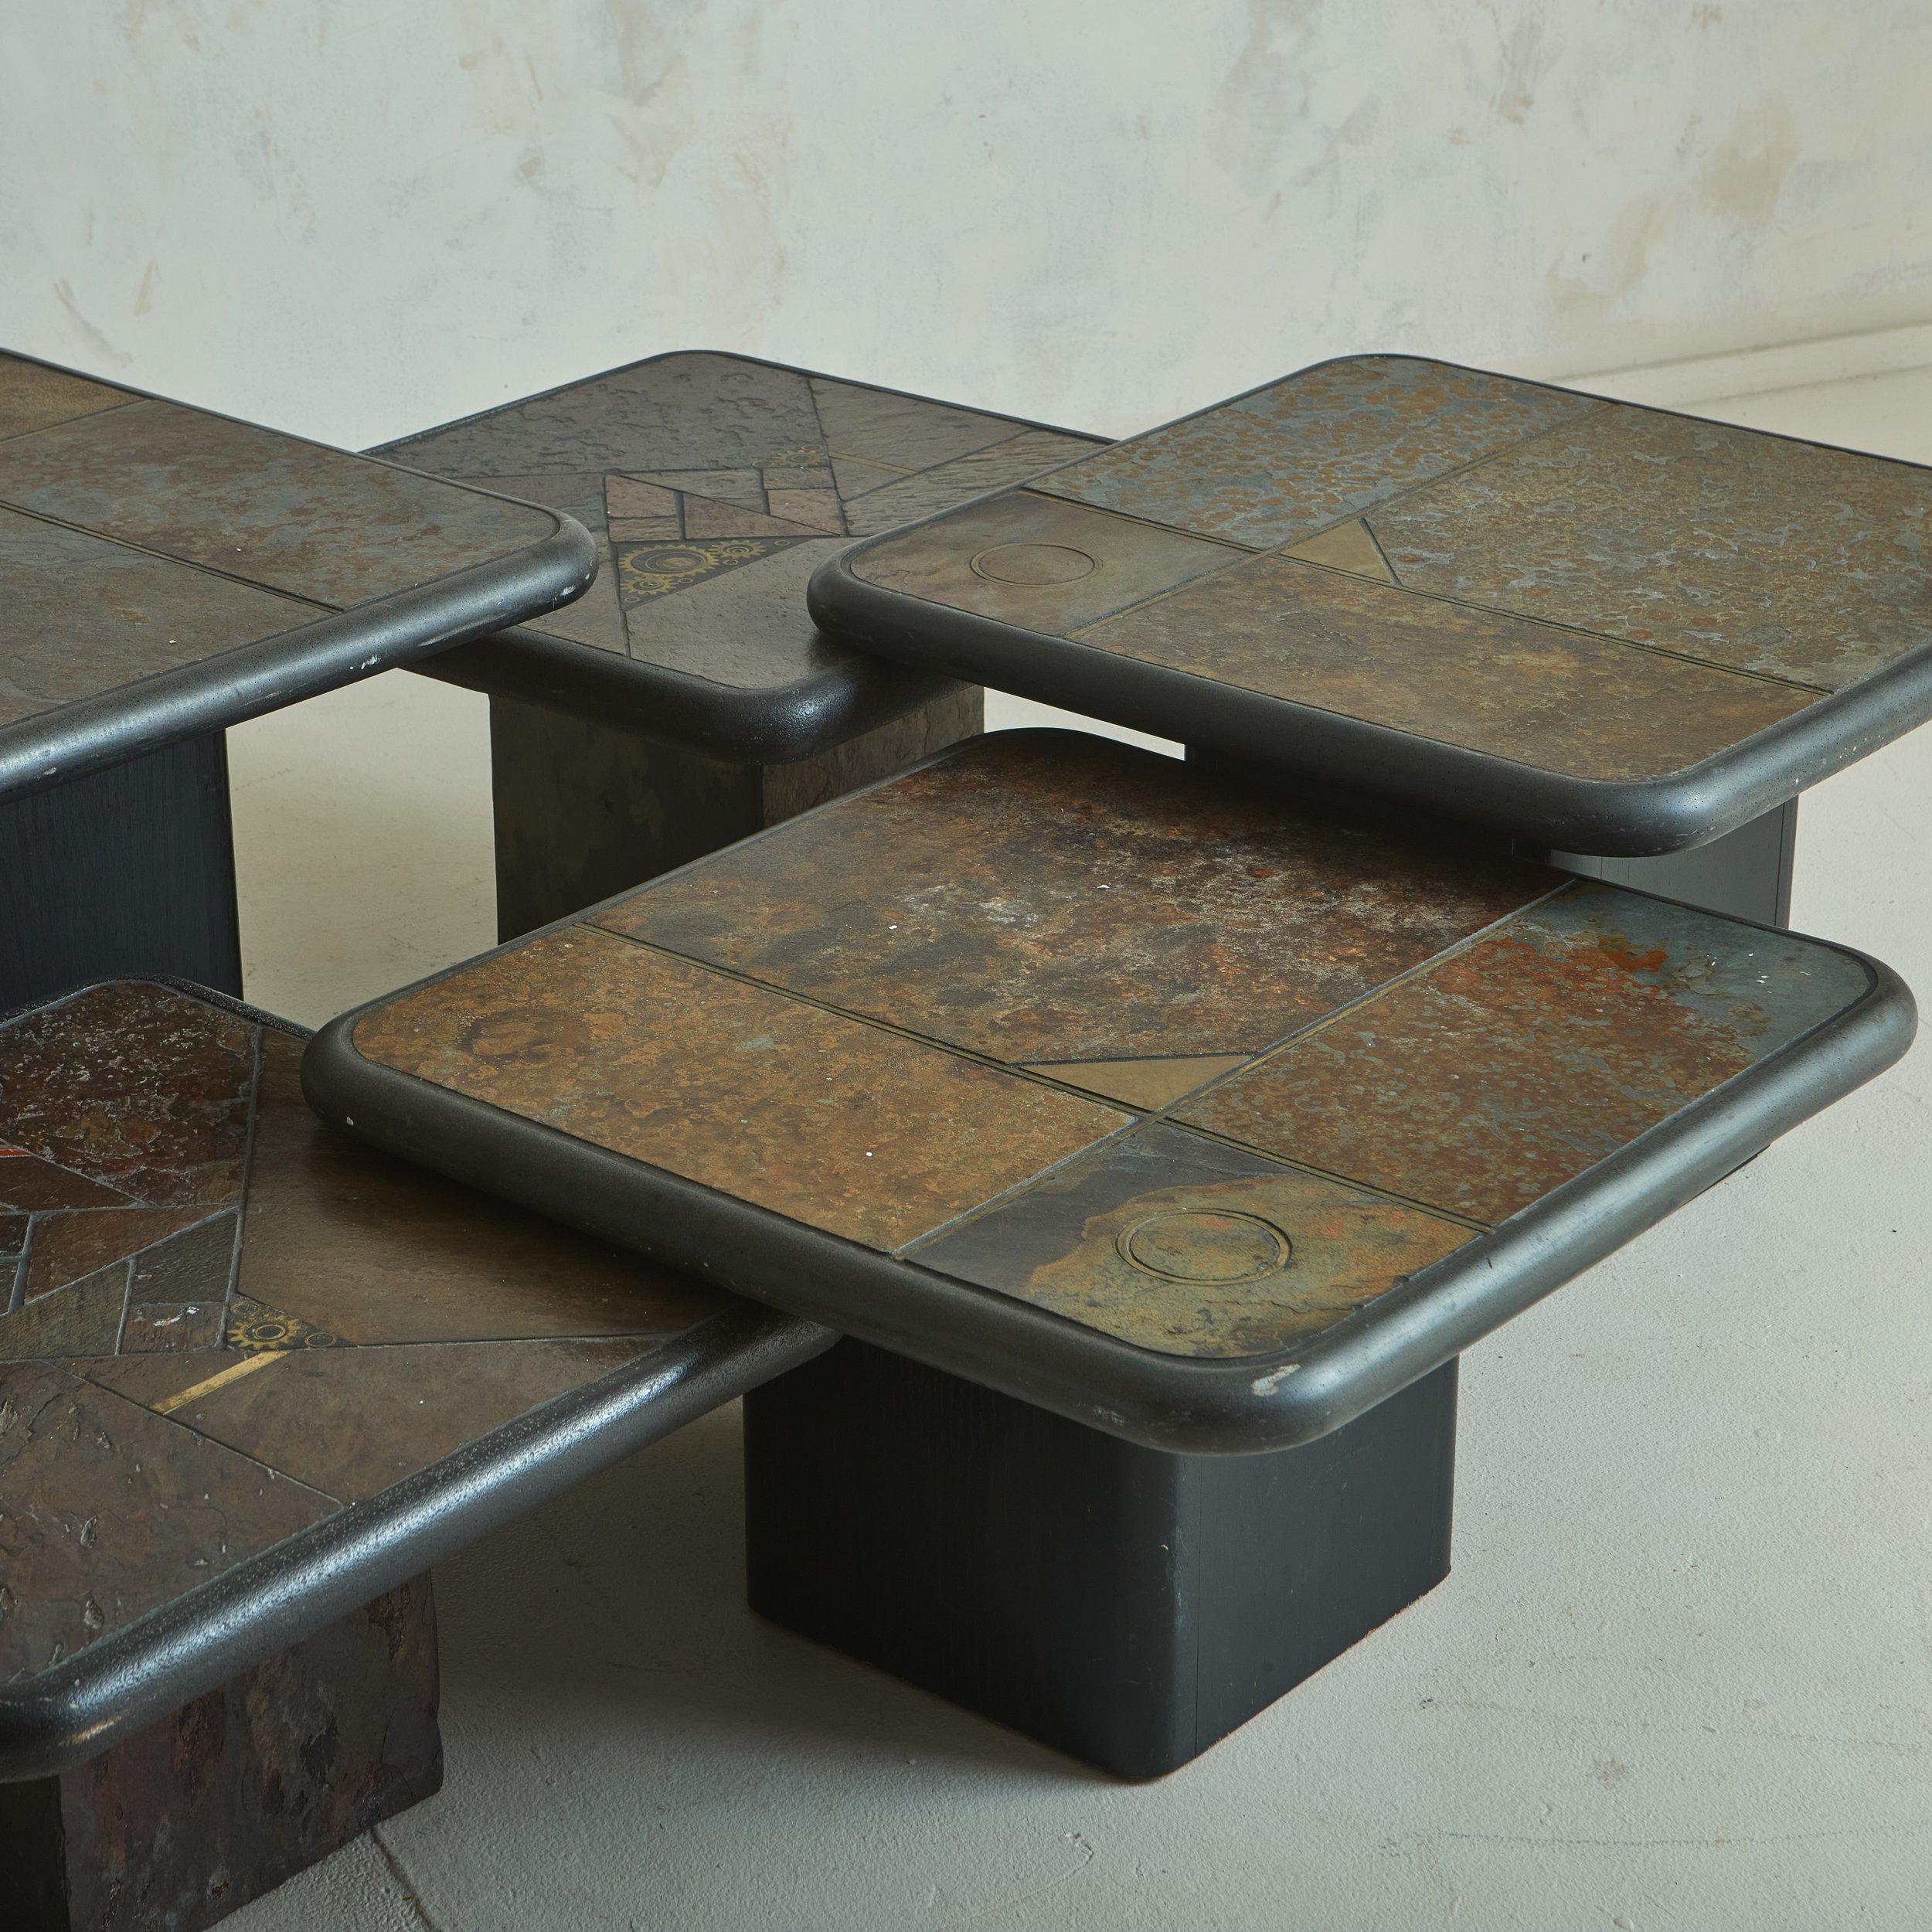 German Trio of Brutalist Mosaic Wood Base Nesting Tables by Paul Kingma for Kneip